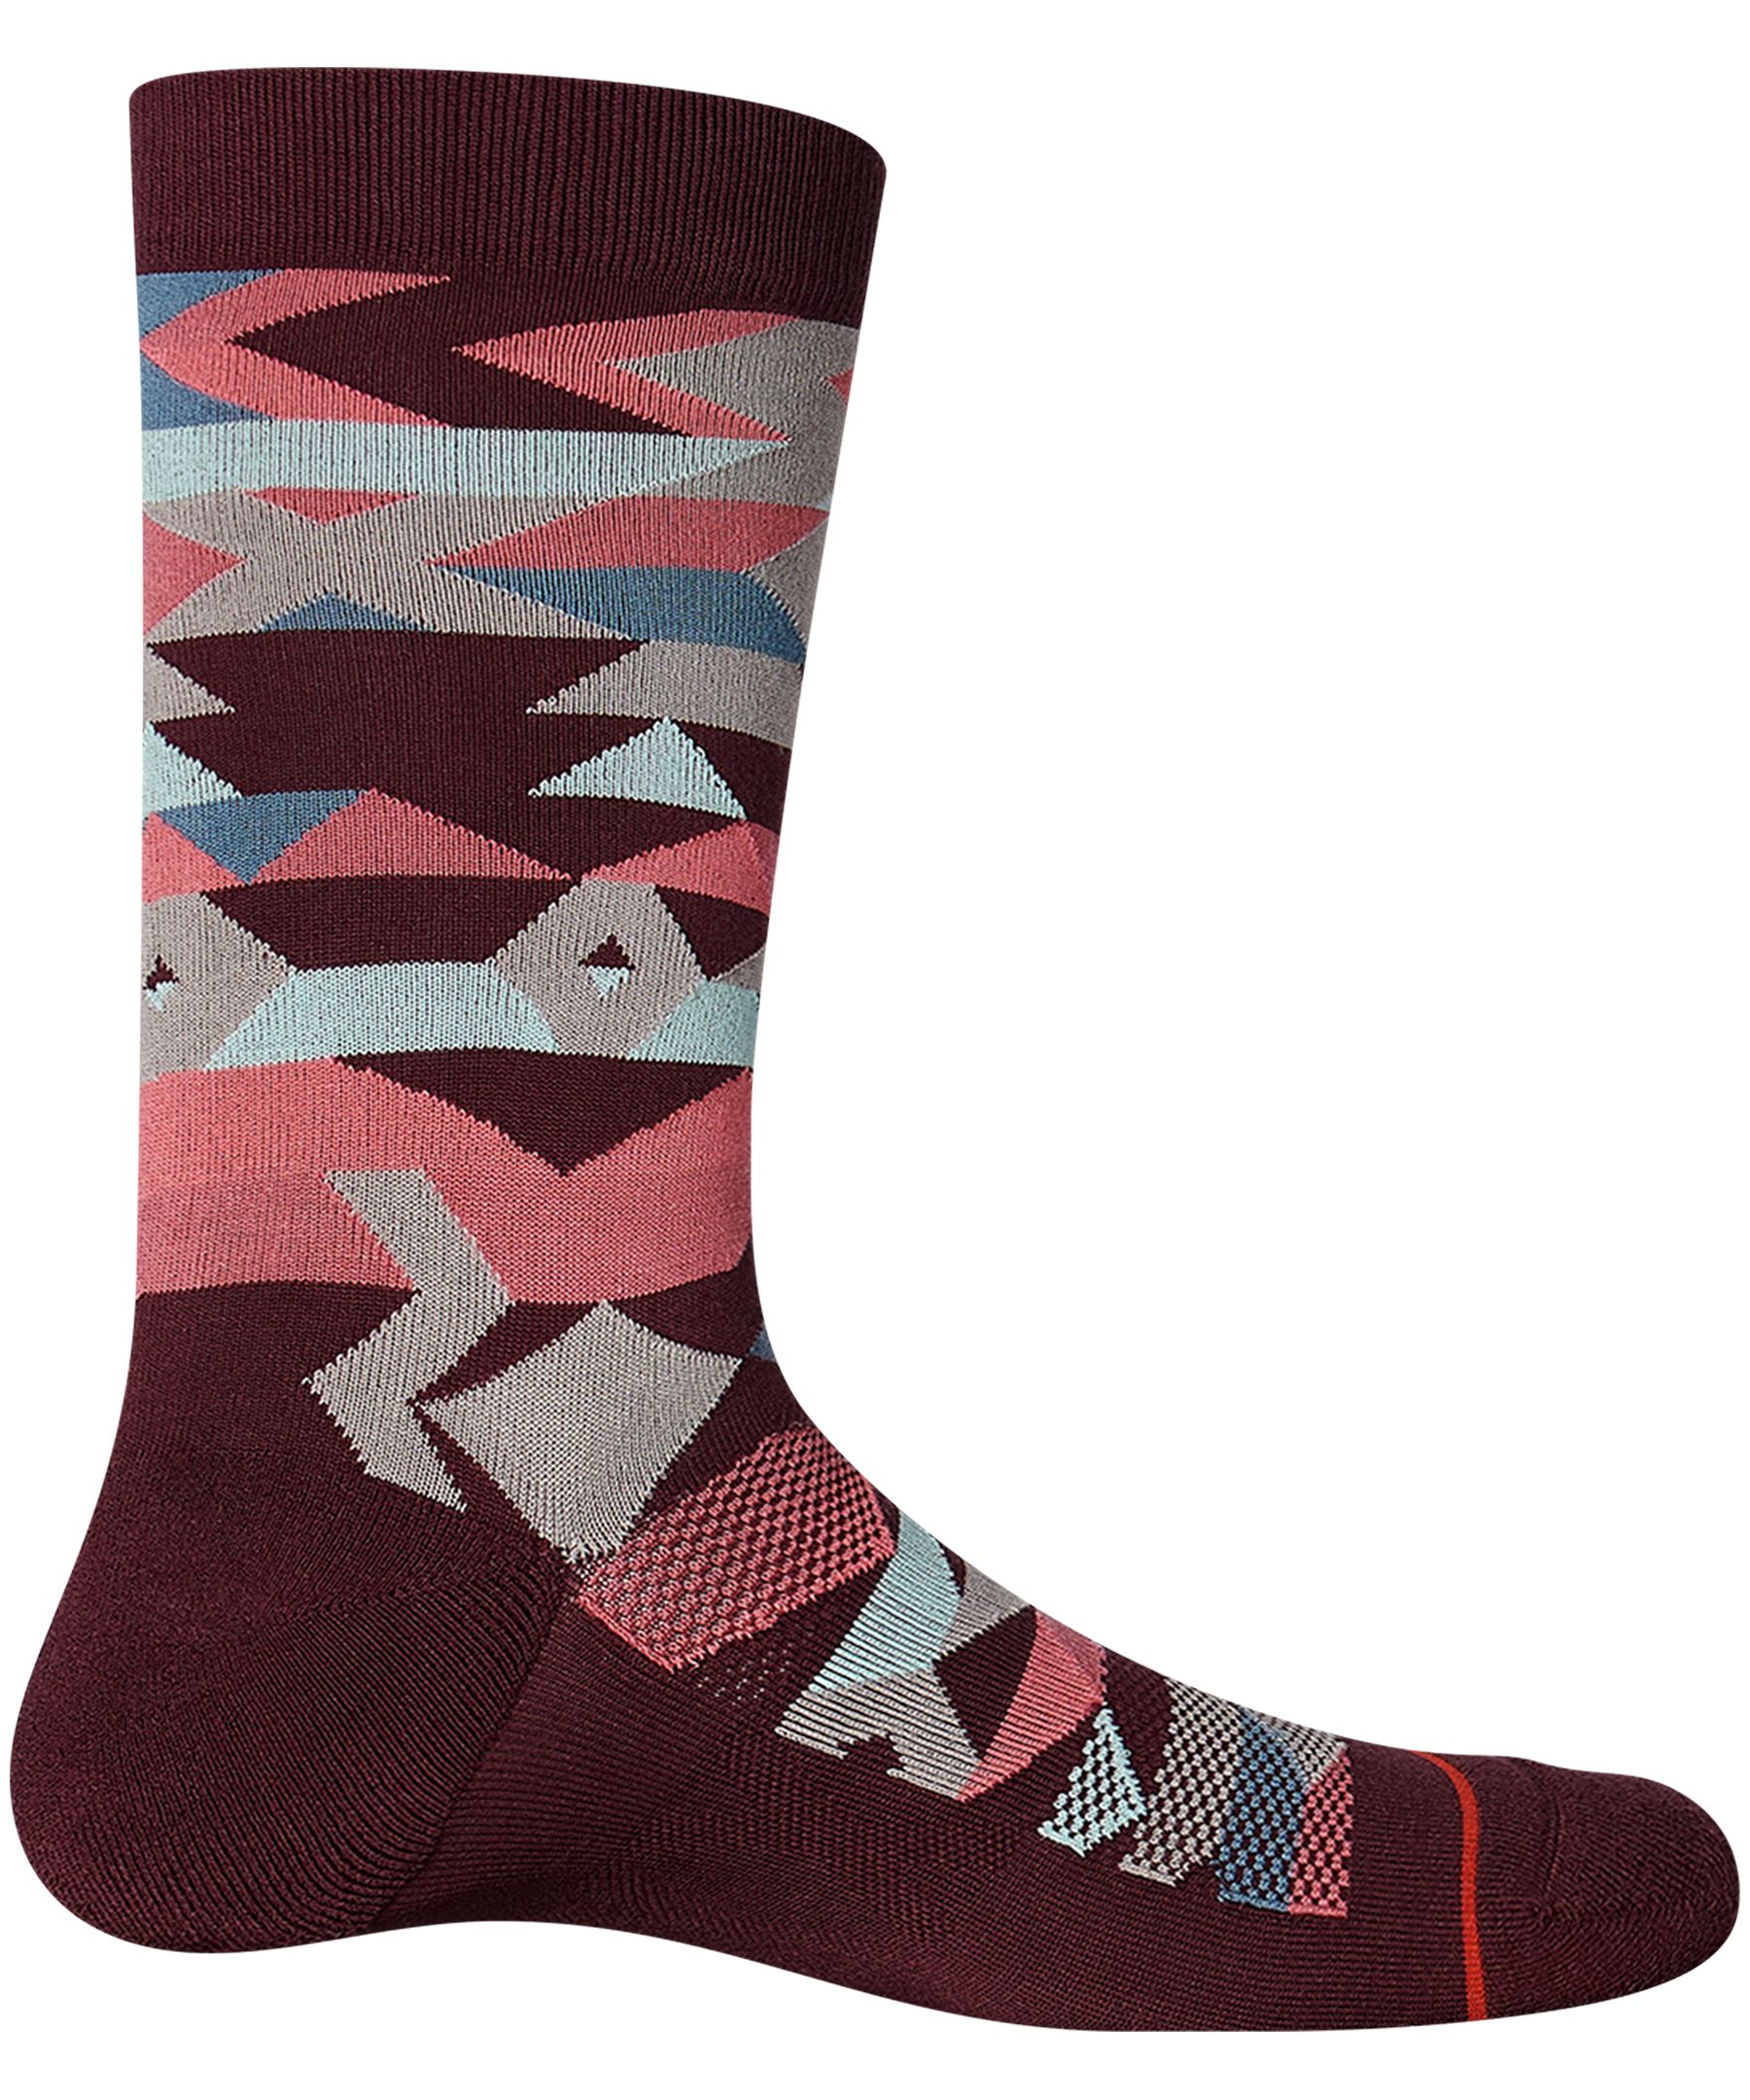 Denver Hayes Men's 2-Pack Quad Comfort Rayon From Bamboo Socks